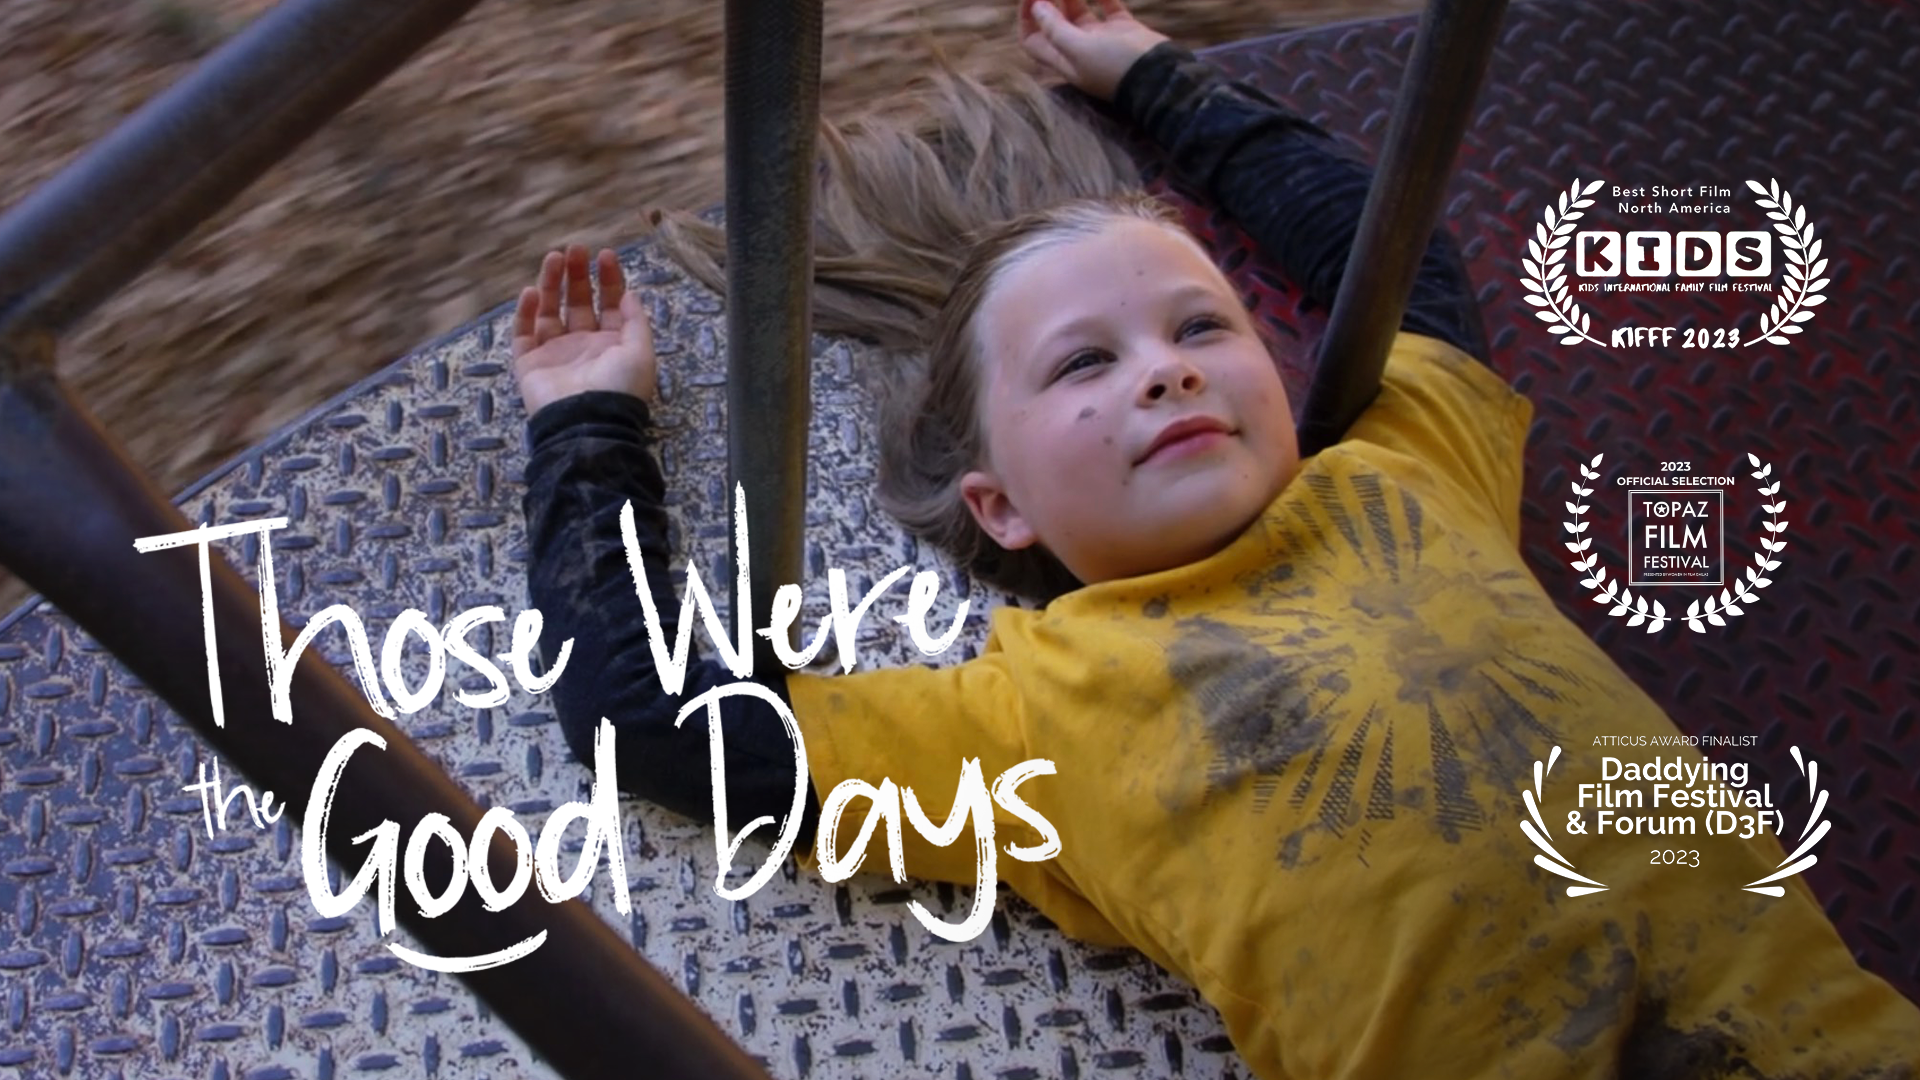 Sonscreen Film "Those Where the Good Days" receives award in 2023